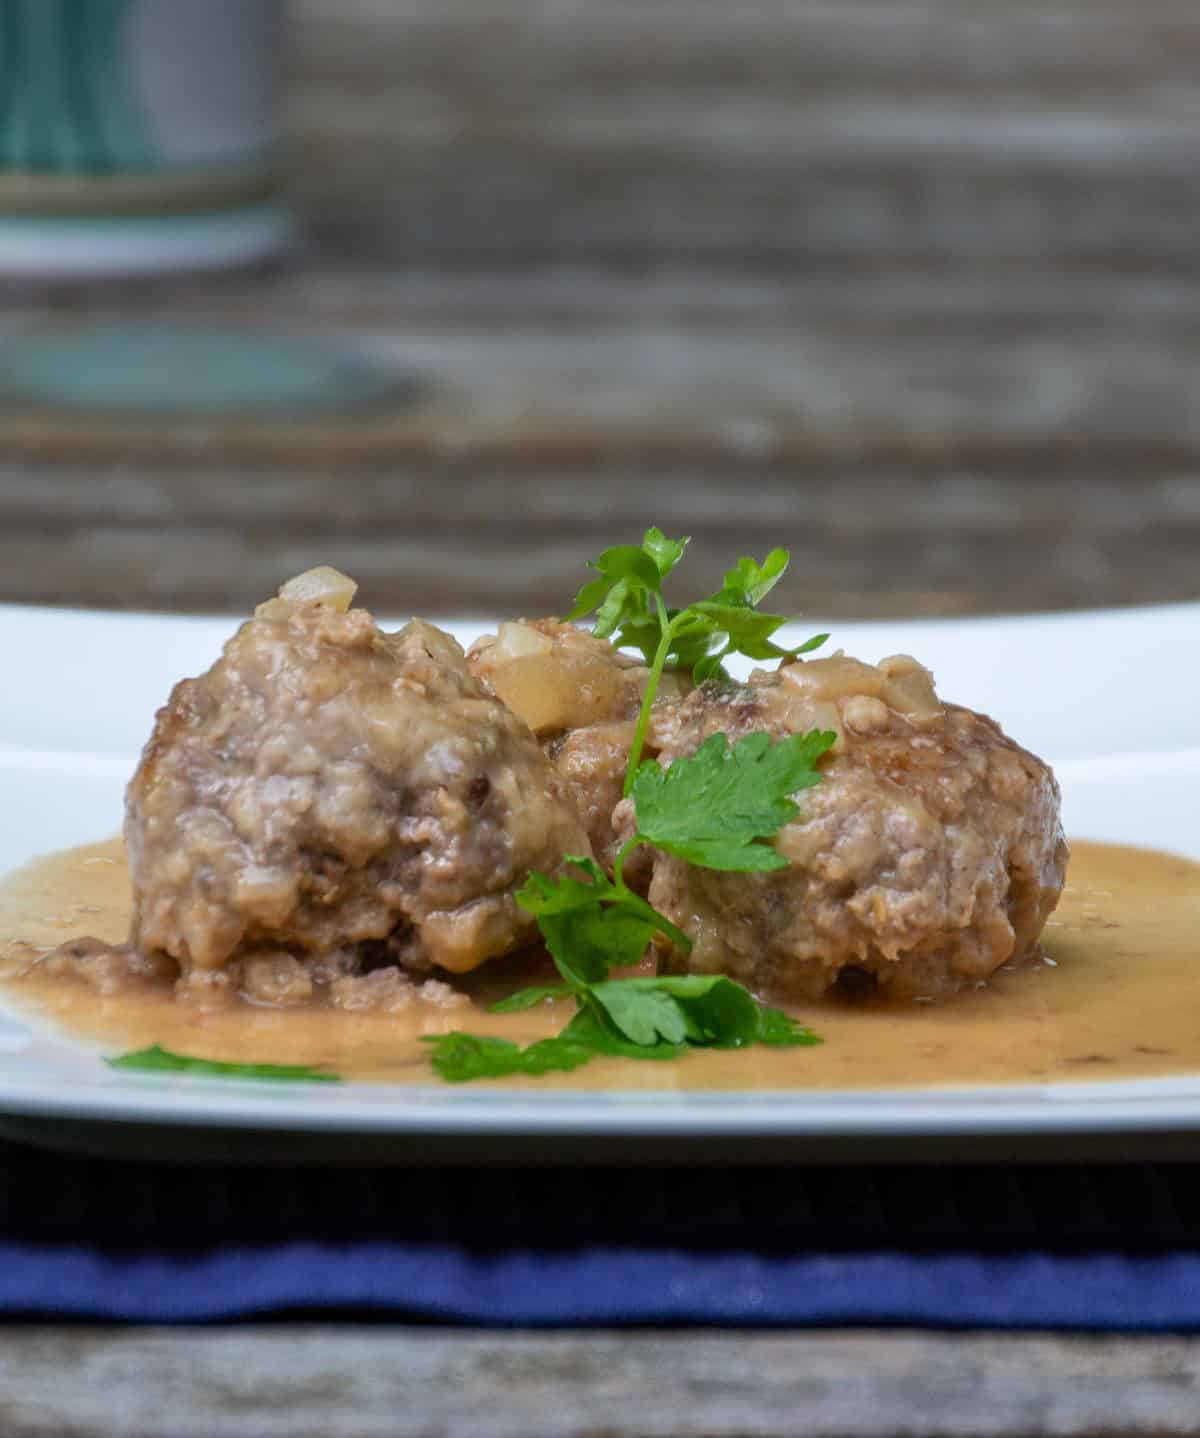  Impress your friends and family with these beautifully grilled and delicious meatballs